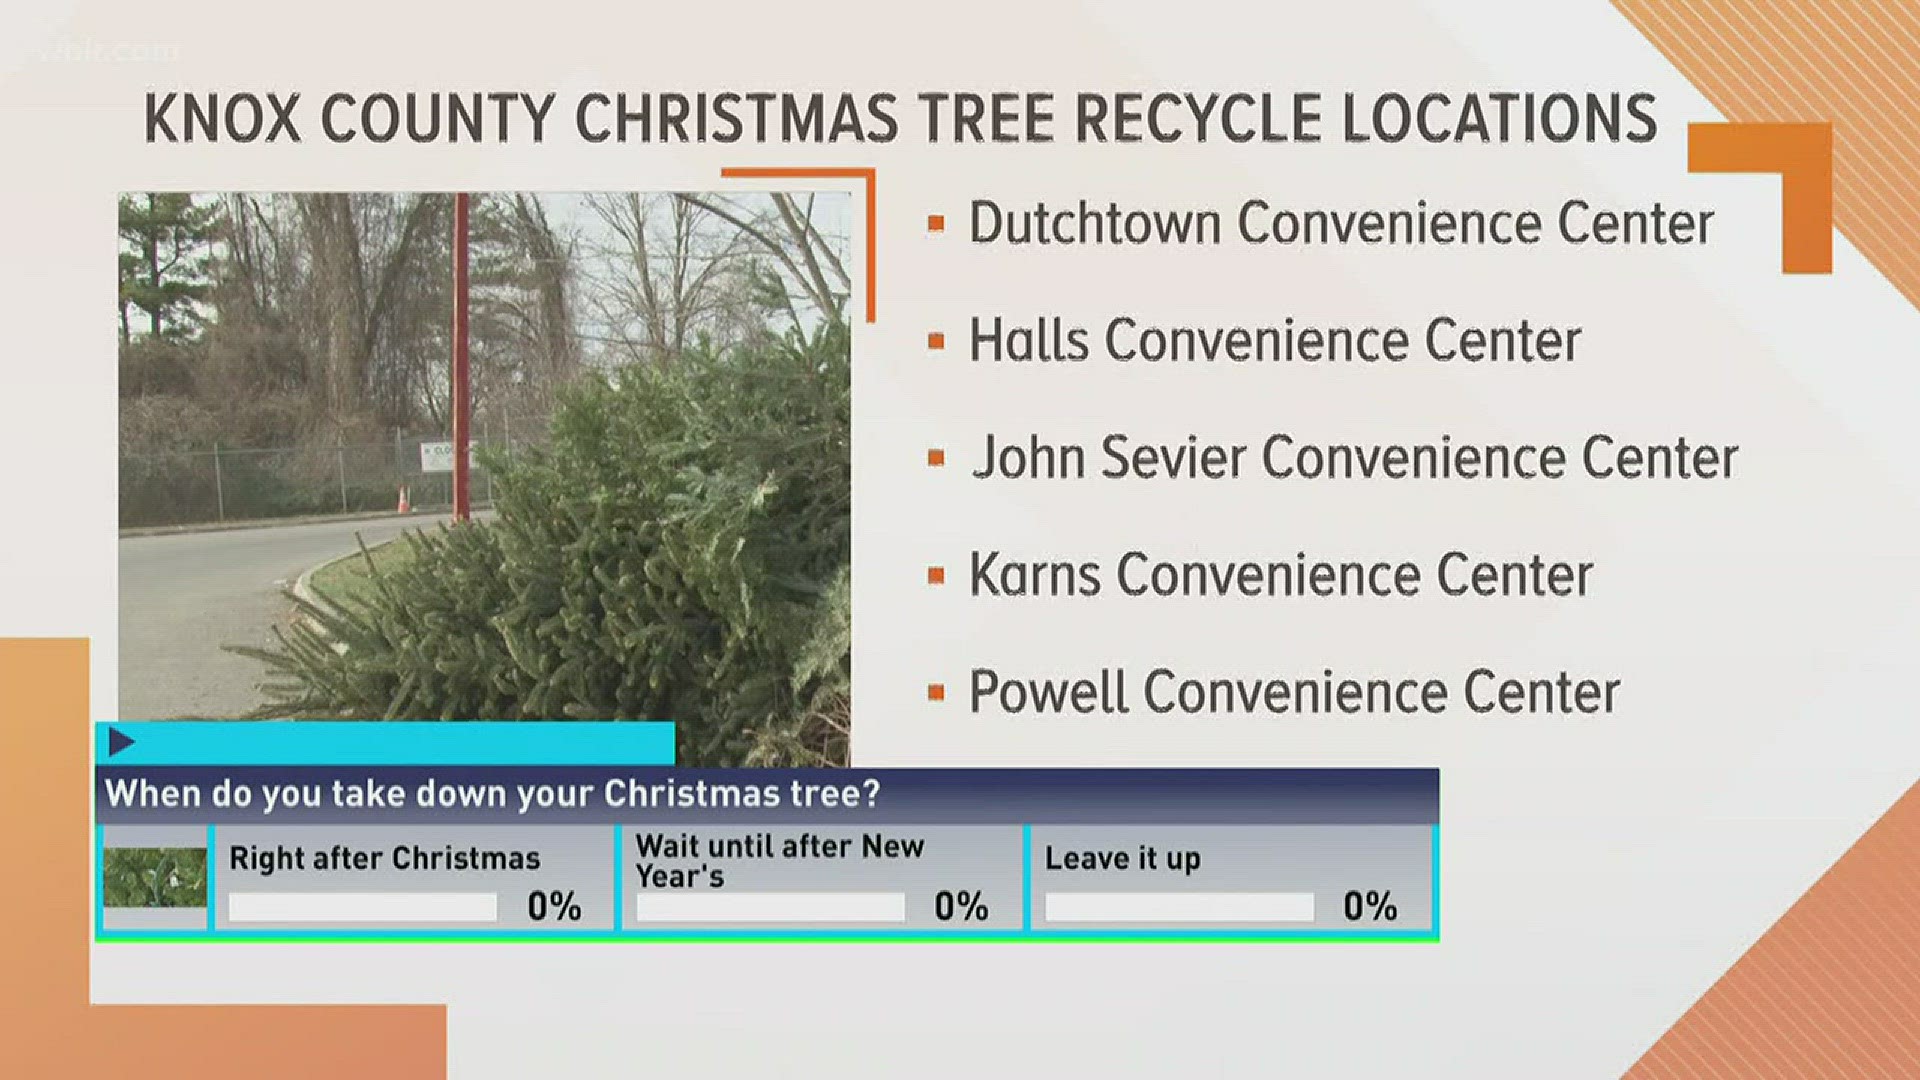 Trees can be taken to Dutchtown, Halls, John Sevier, Karns, Powell, and Tazewell Pike Convenience Centers.